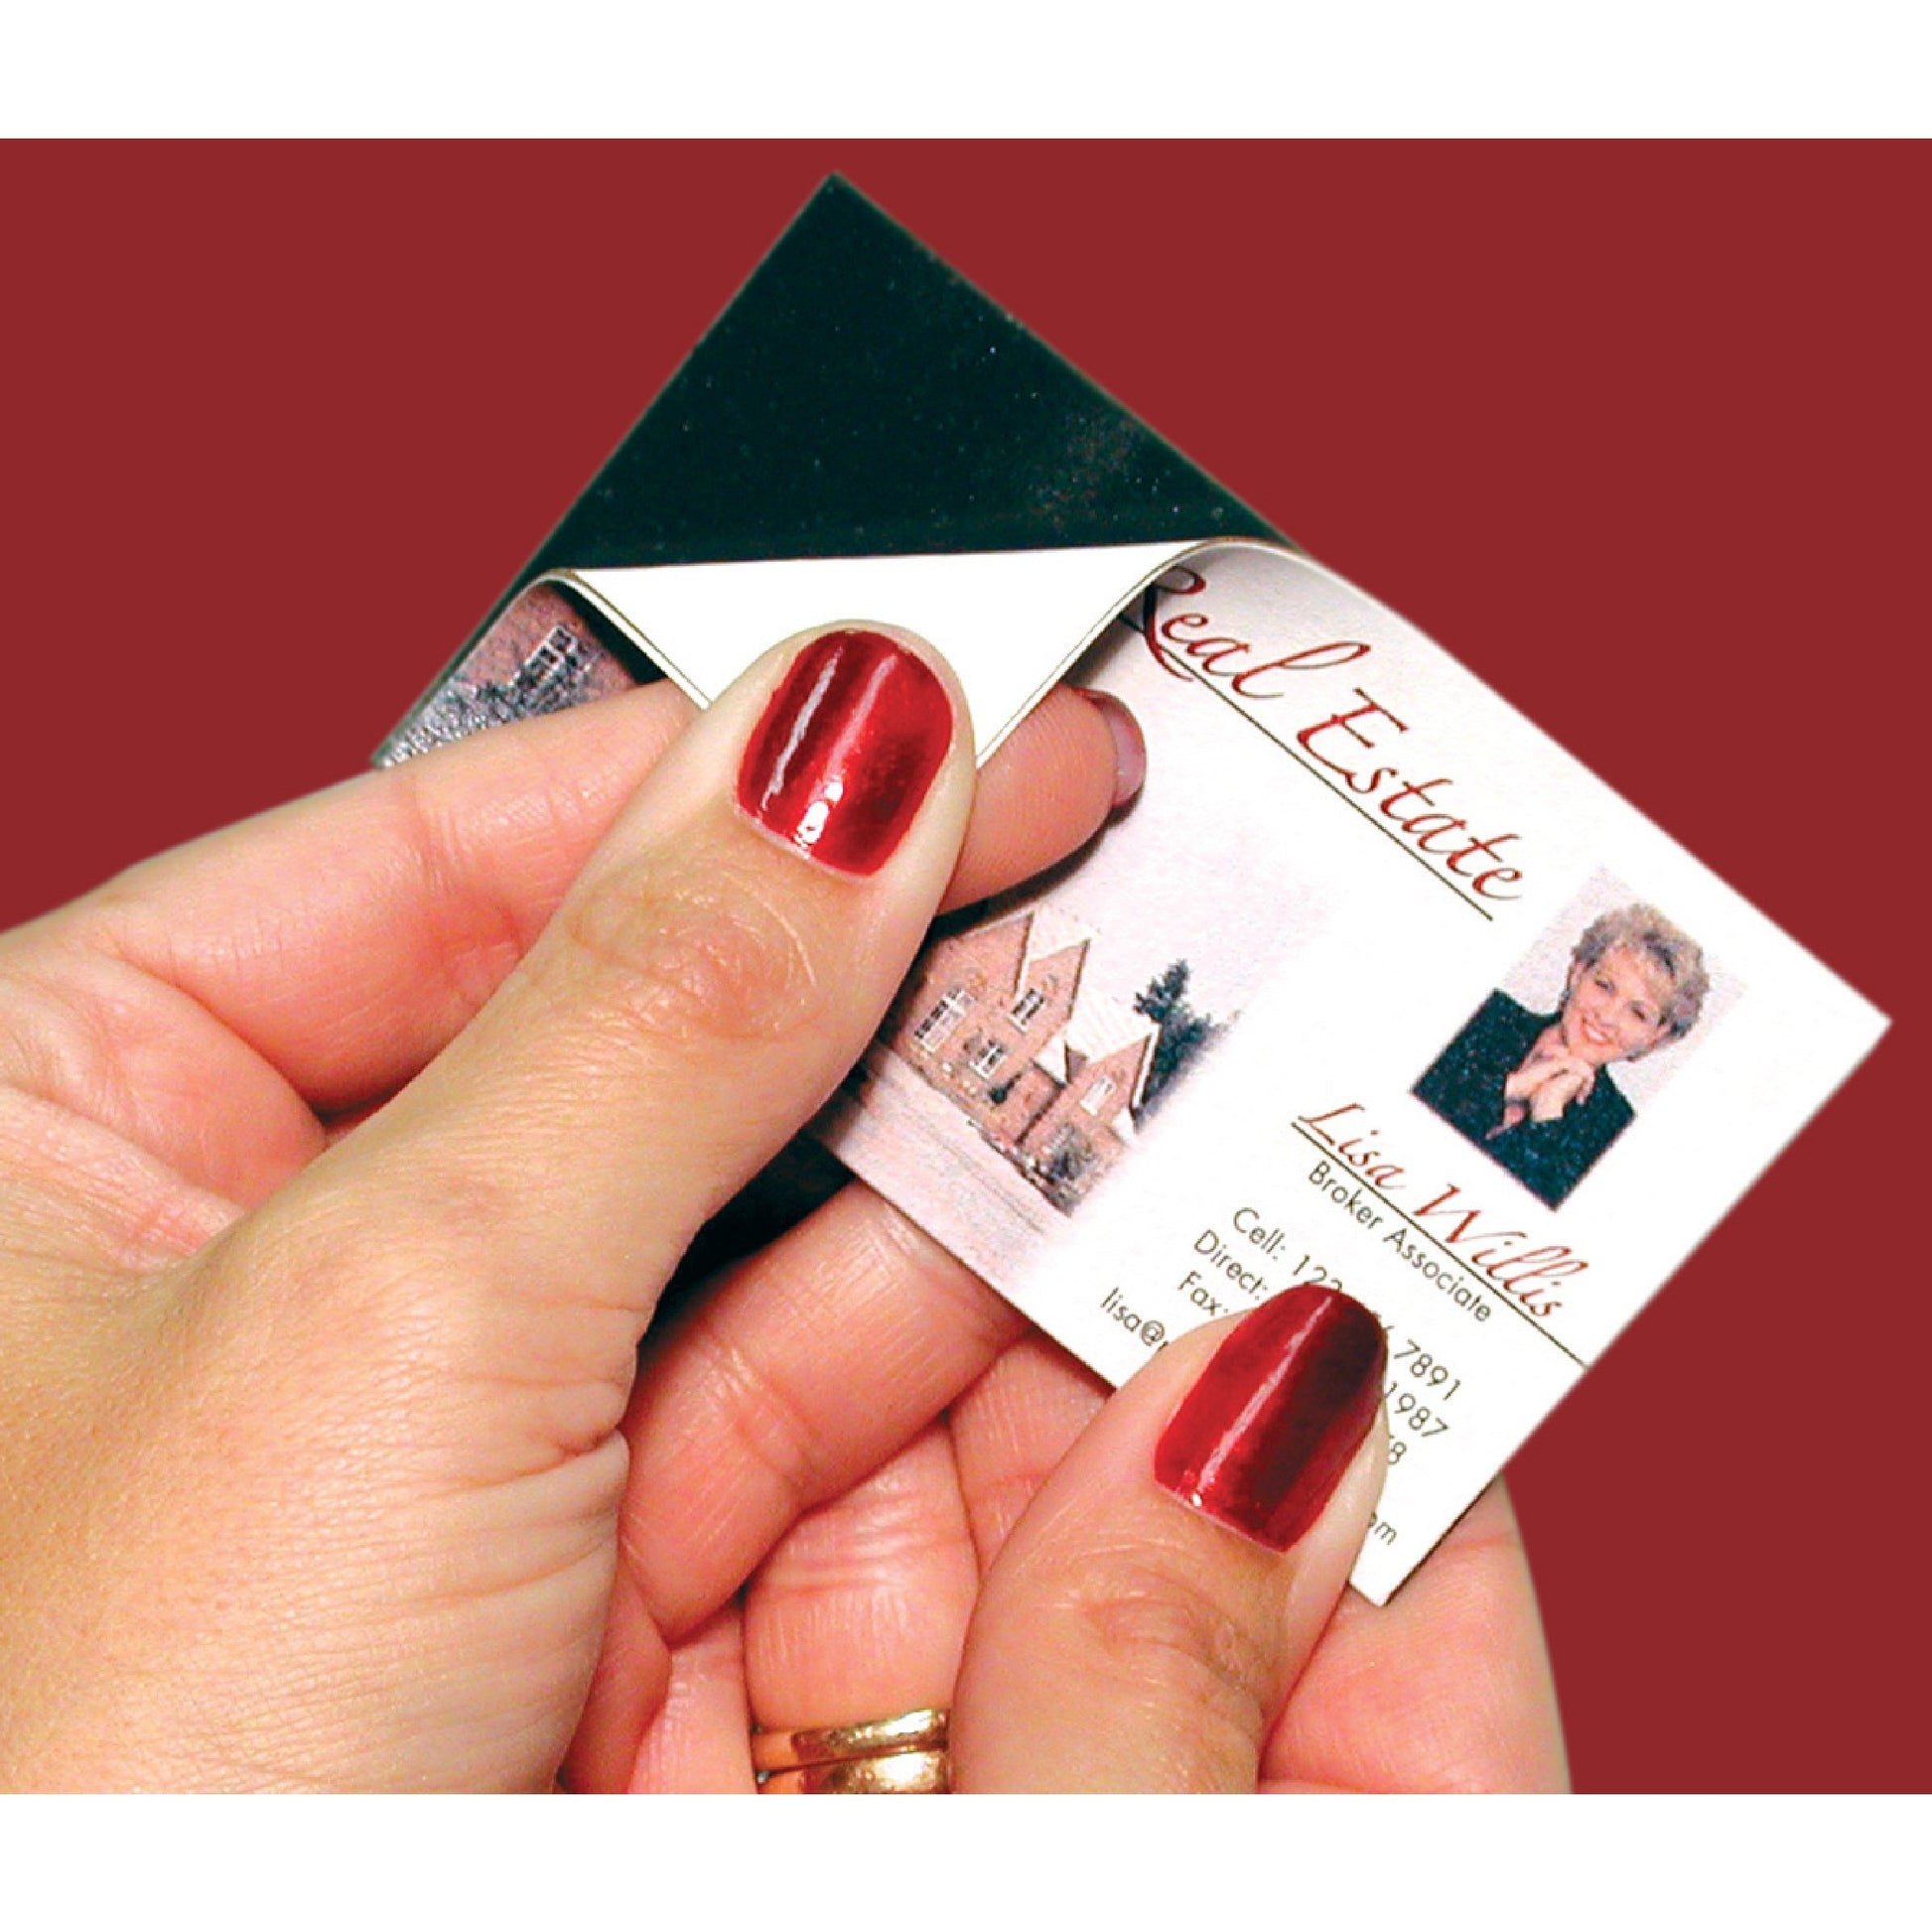 Load image into Gallery viewer, ZGN302X3.5APAA Flexible Magnetic Business Cards (50pk) - In Use